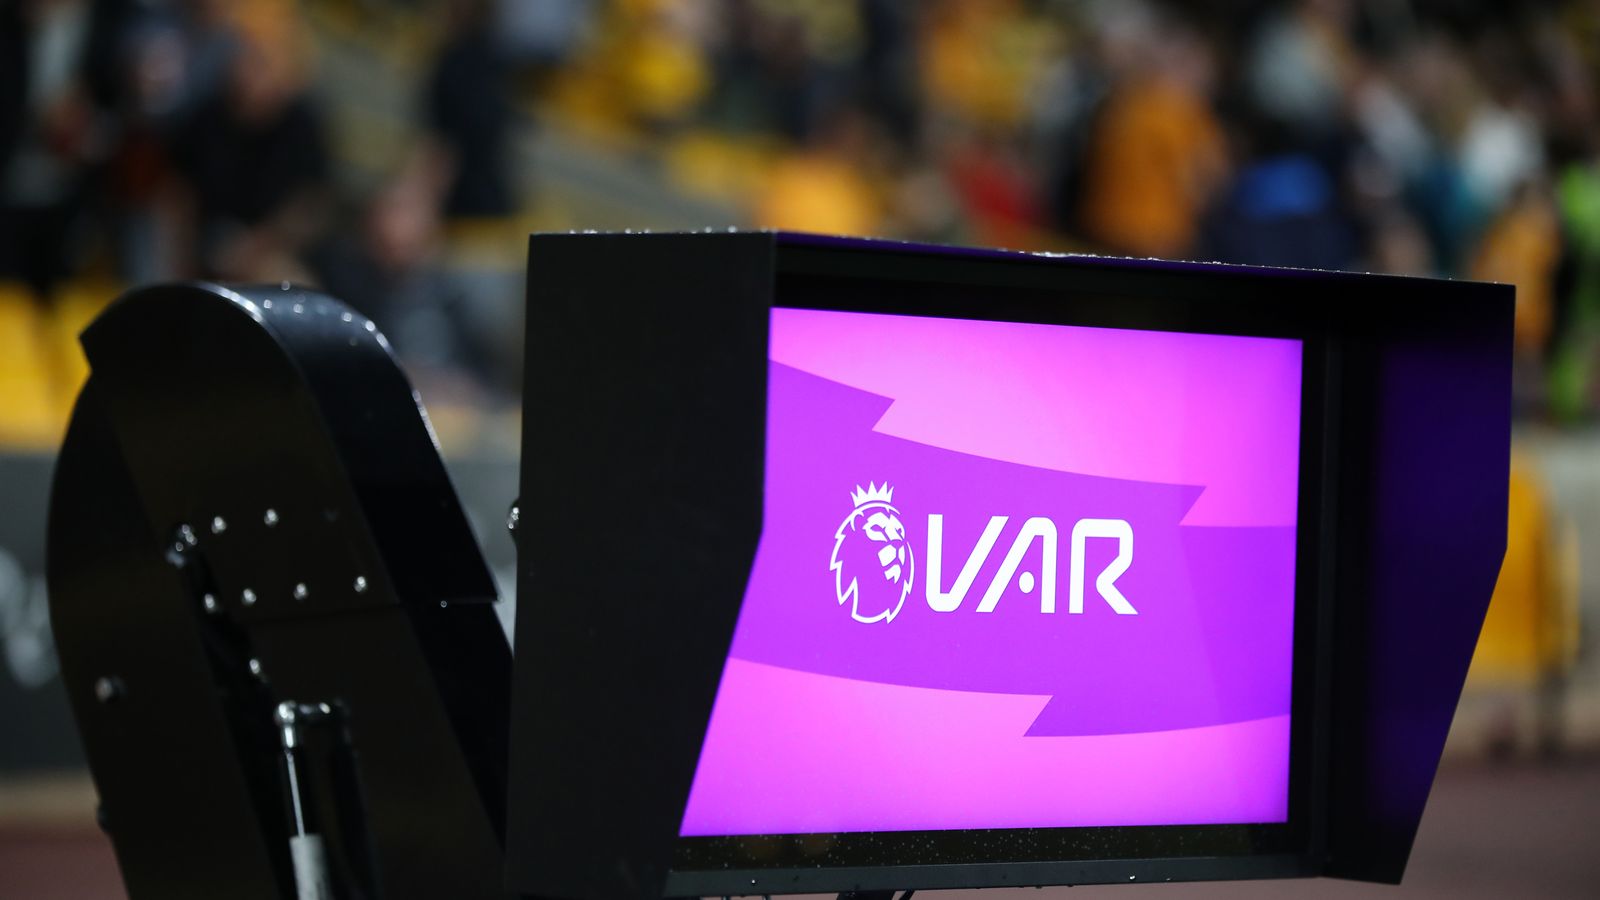 VAR is lawed but can be used in a much more effective way in the Premier League. Take the UCL for example. 